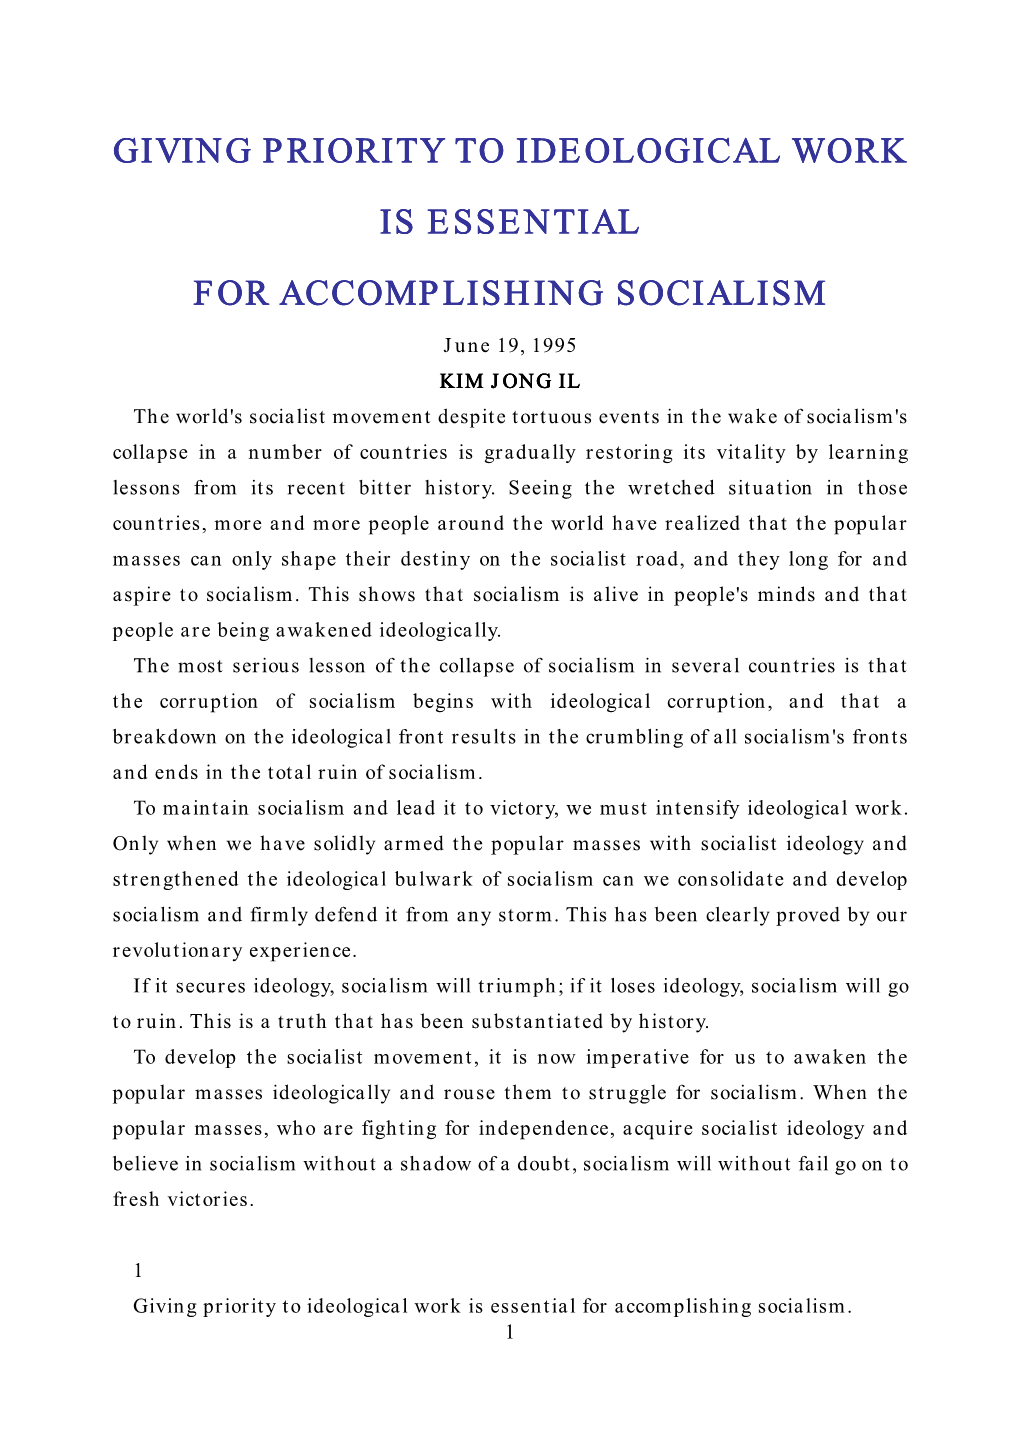 Giving Priority to Ideological Work Is Essential for Accomplishing Socialism